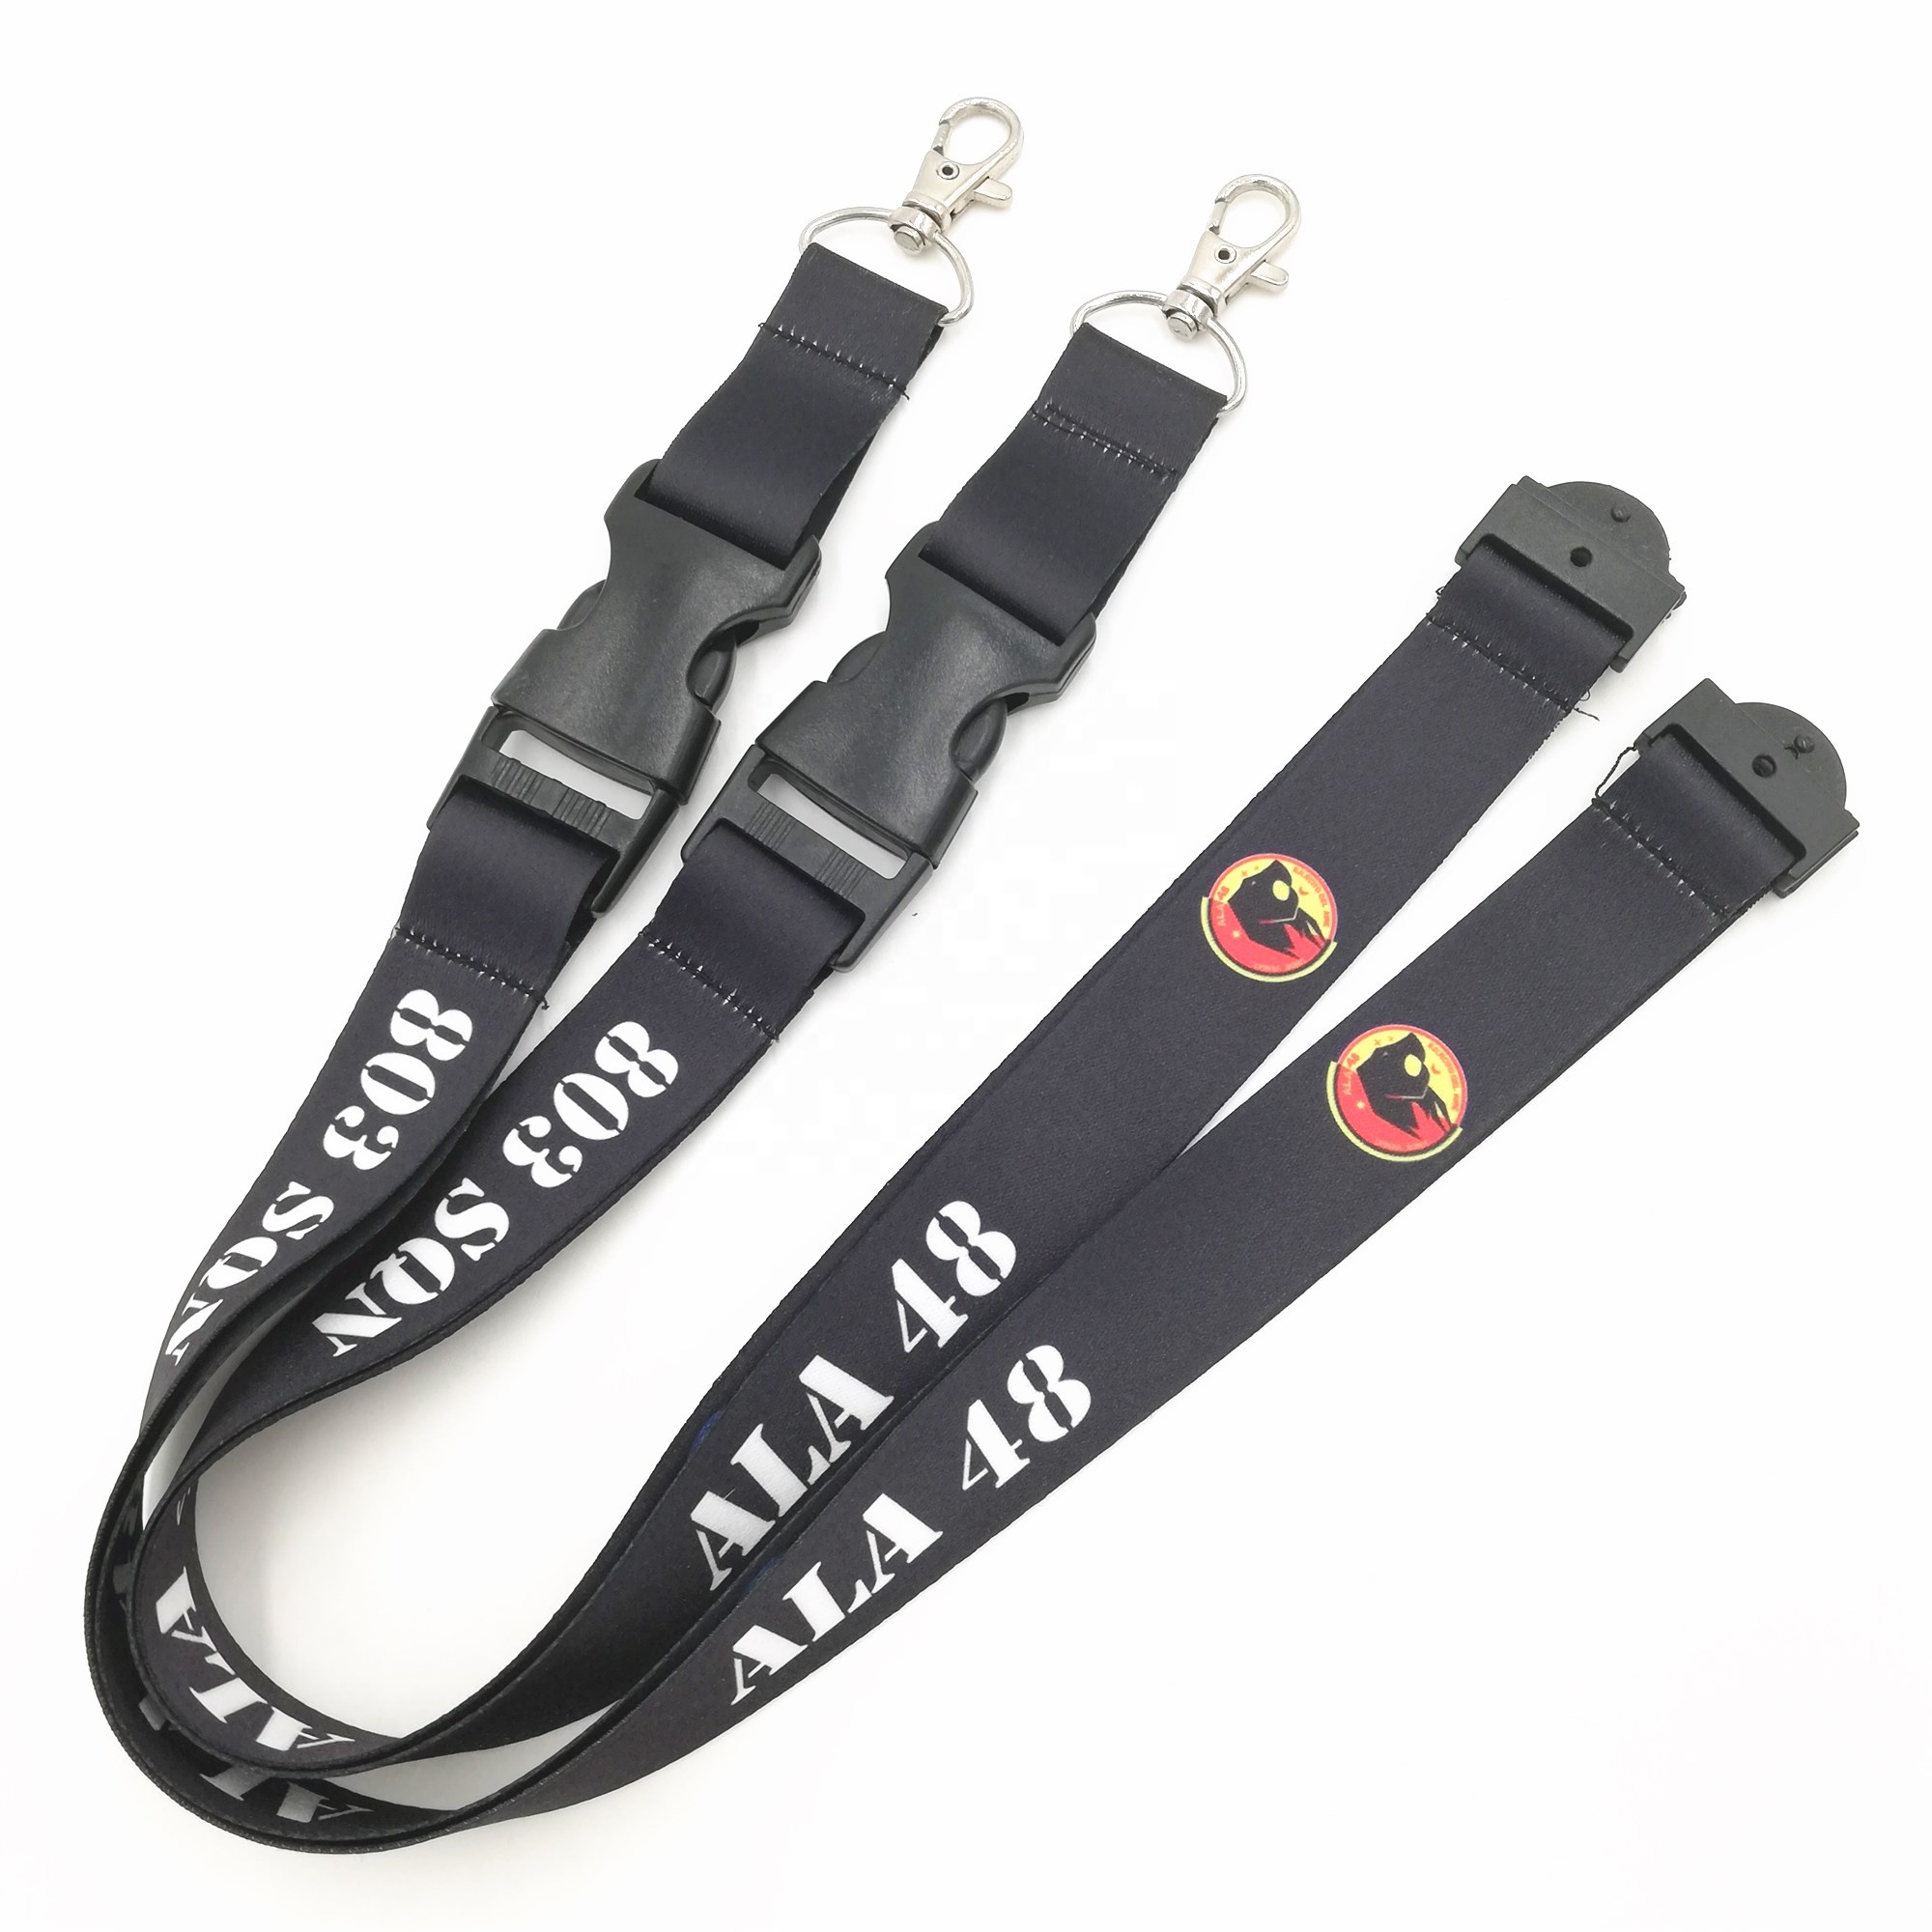 Soft customized  polyester heat transfer lanyard with plastic buckle and safety buckle